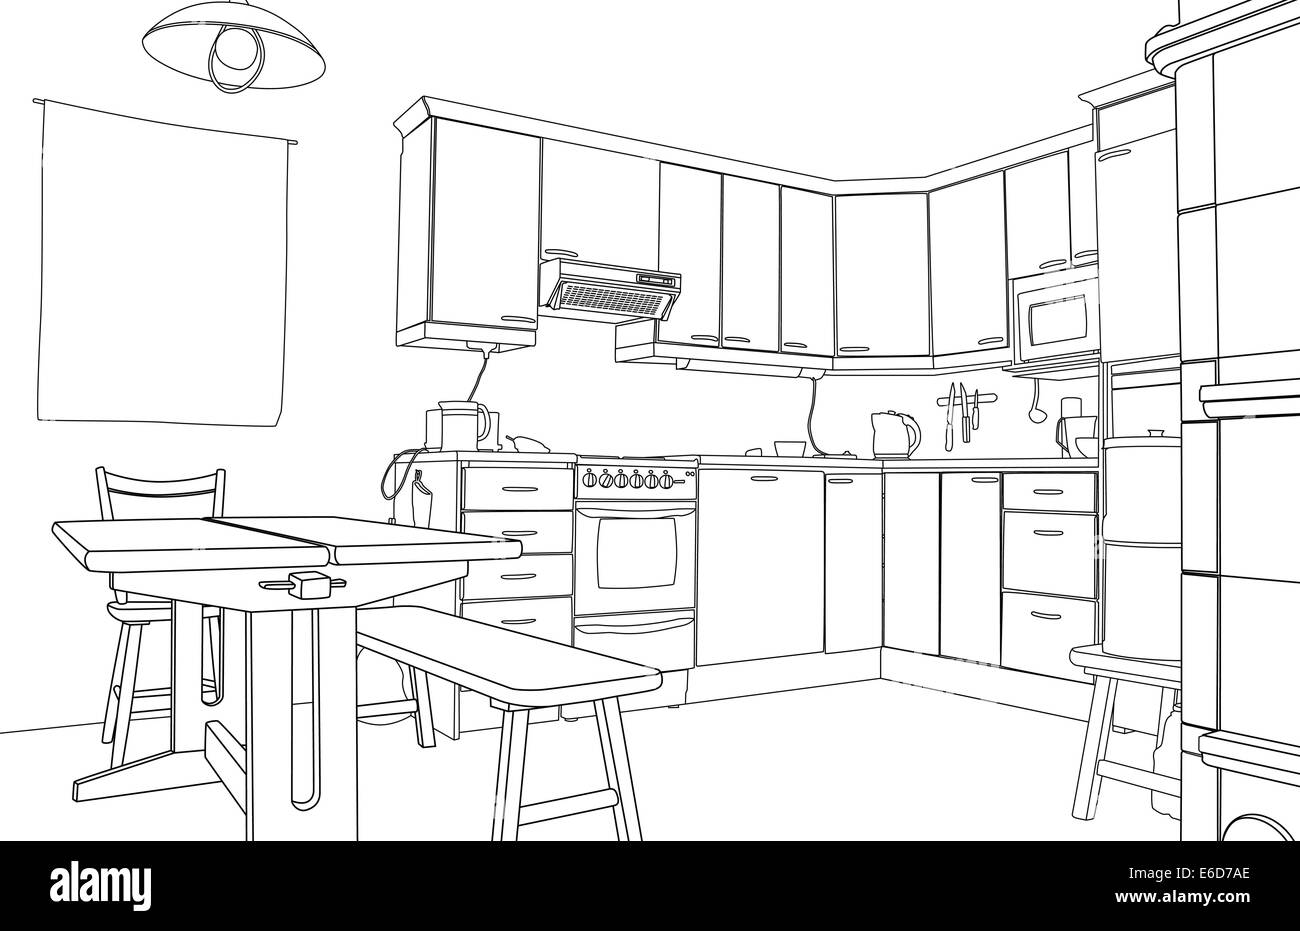 Editable vector illustration of an outline sketch of a kitchen interior Stock Vector